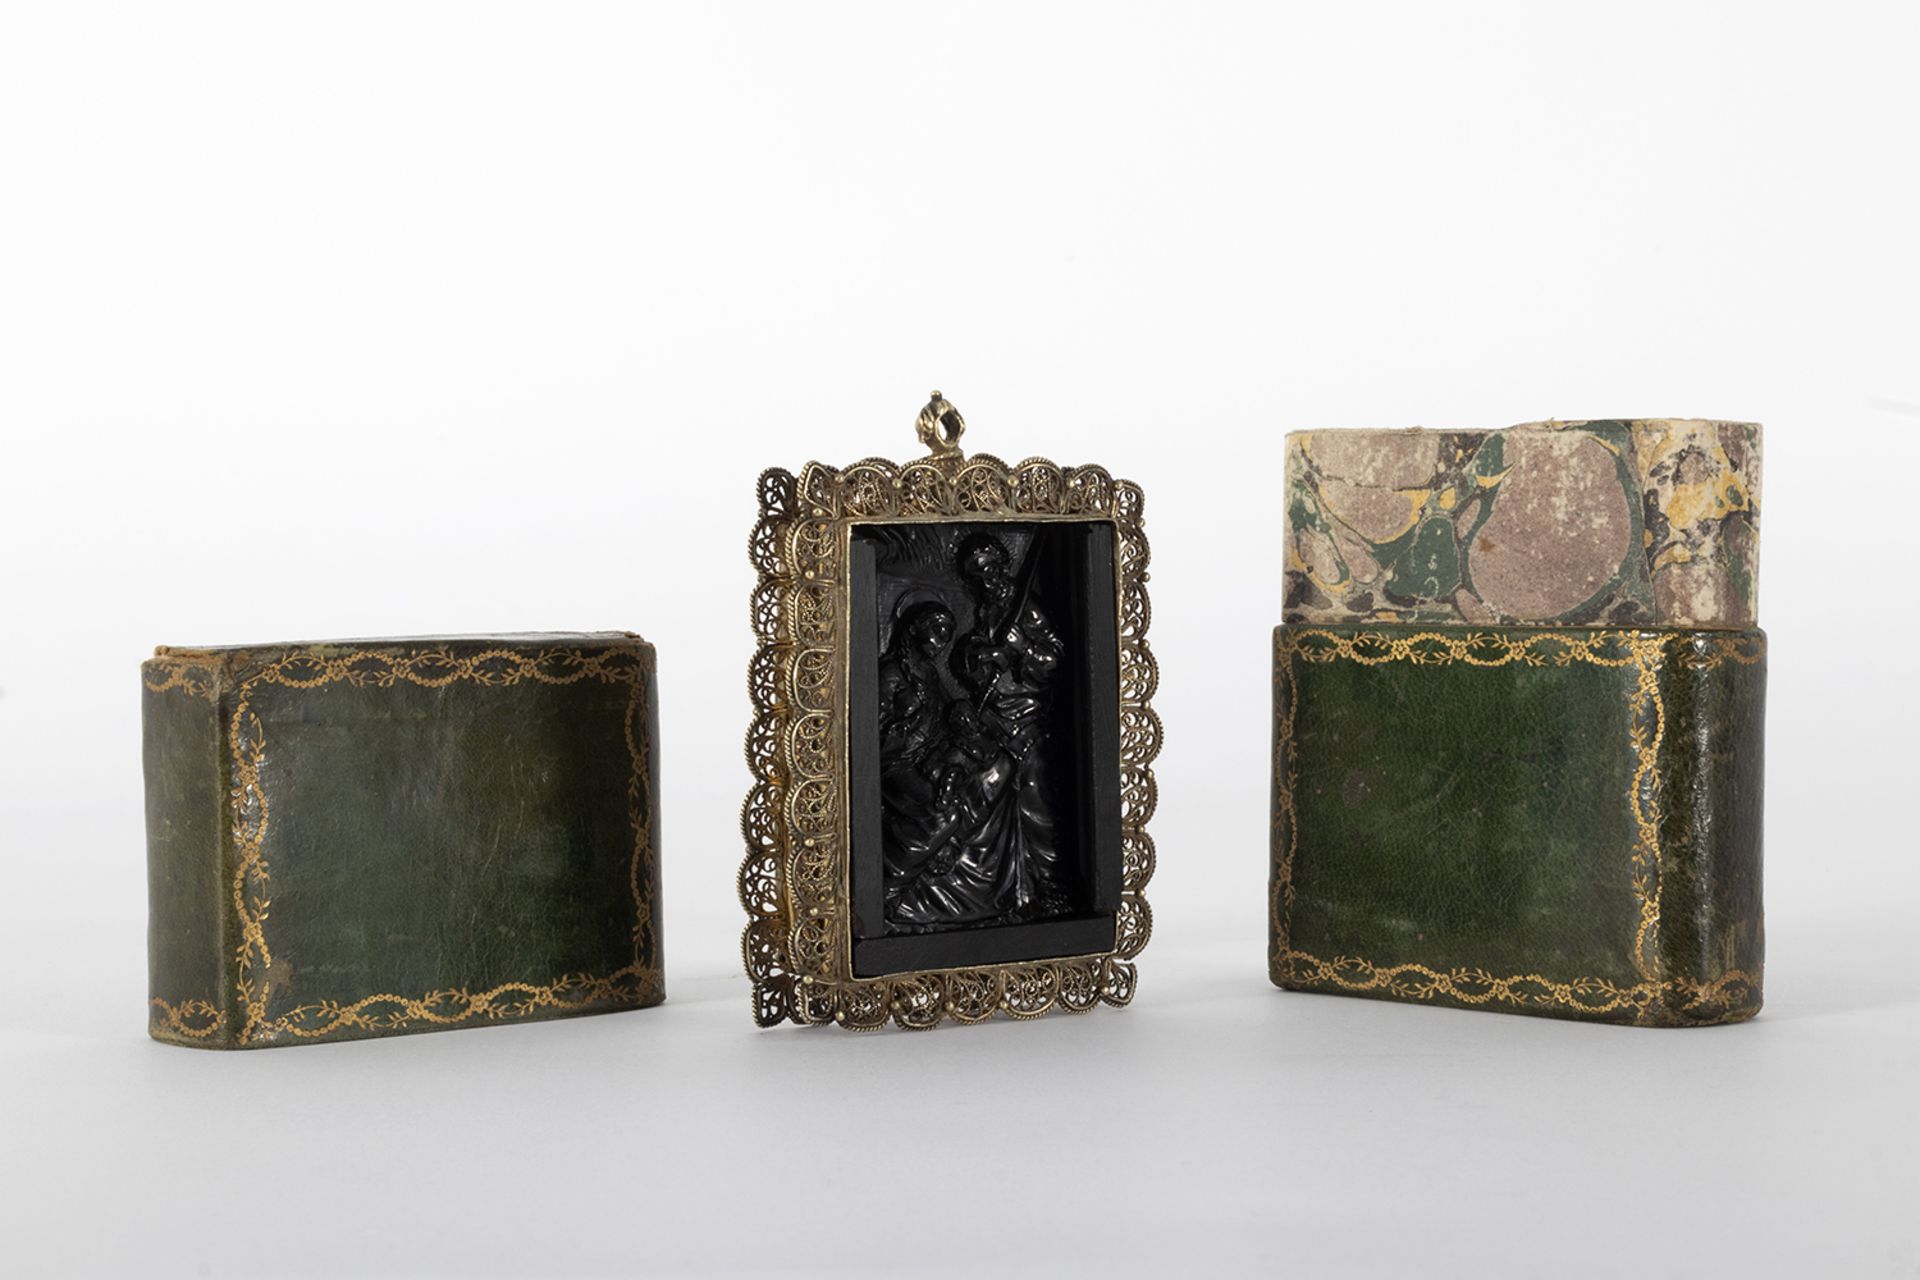 Reliquary with a filigree silver frame.